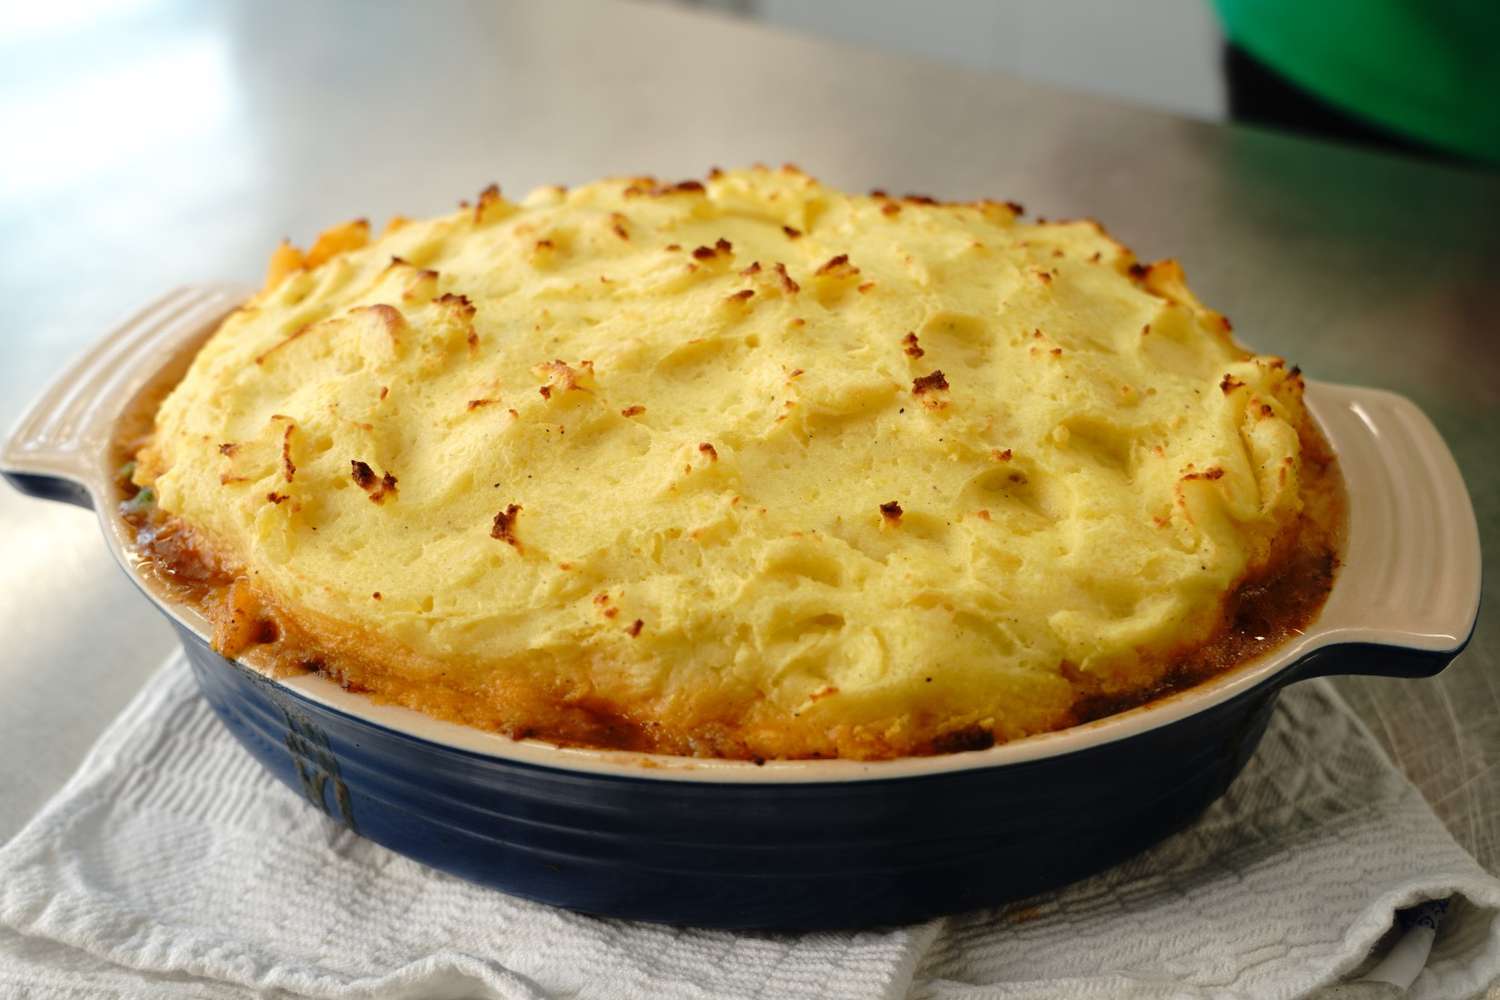 homemade shepherd's pie topped with mashed potatoes in a casserole dish